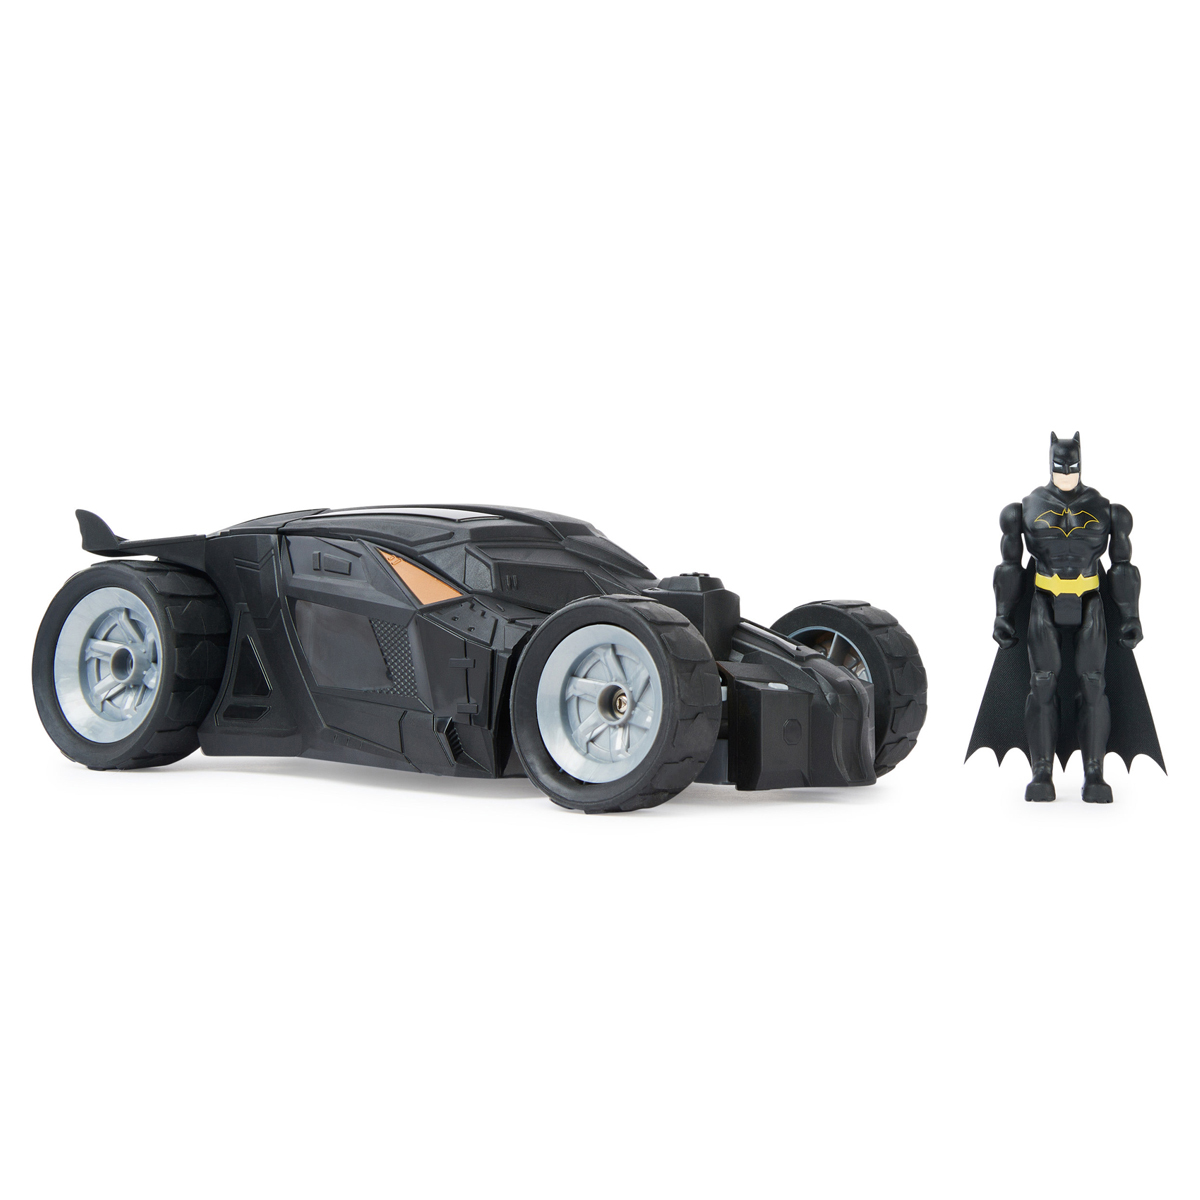 Batmobile RC Car with Figure | The Entertainer